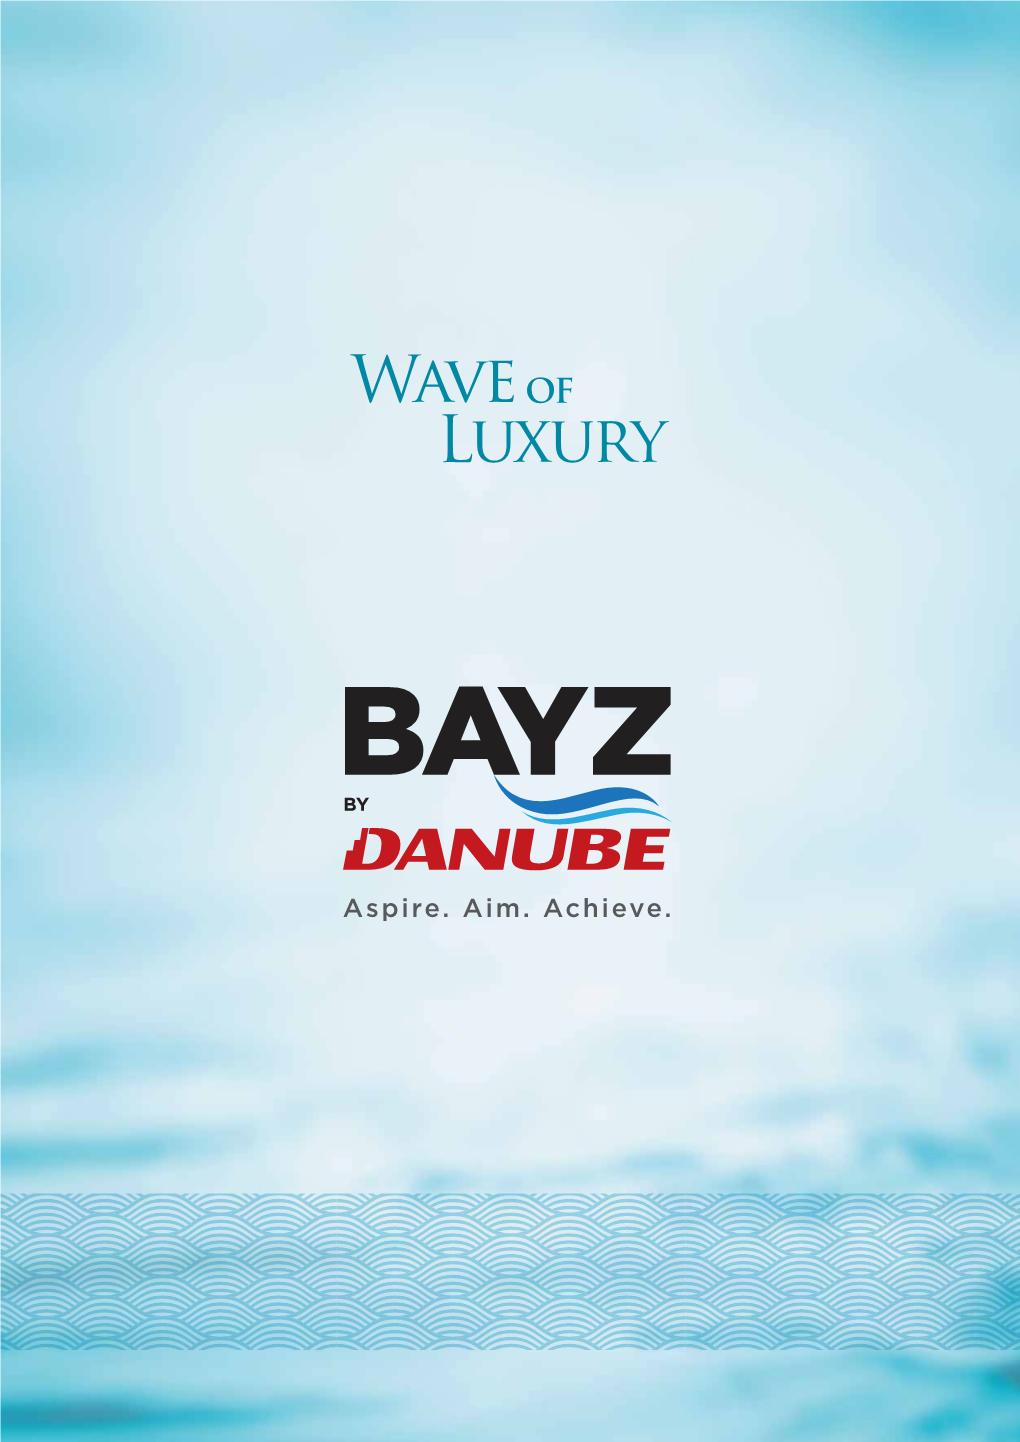 Danube Group Companies Are